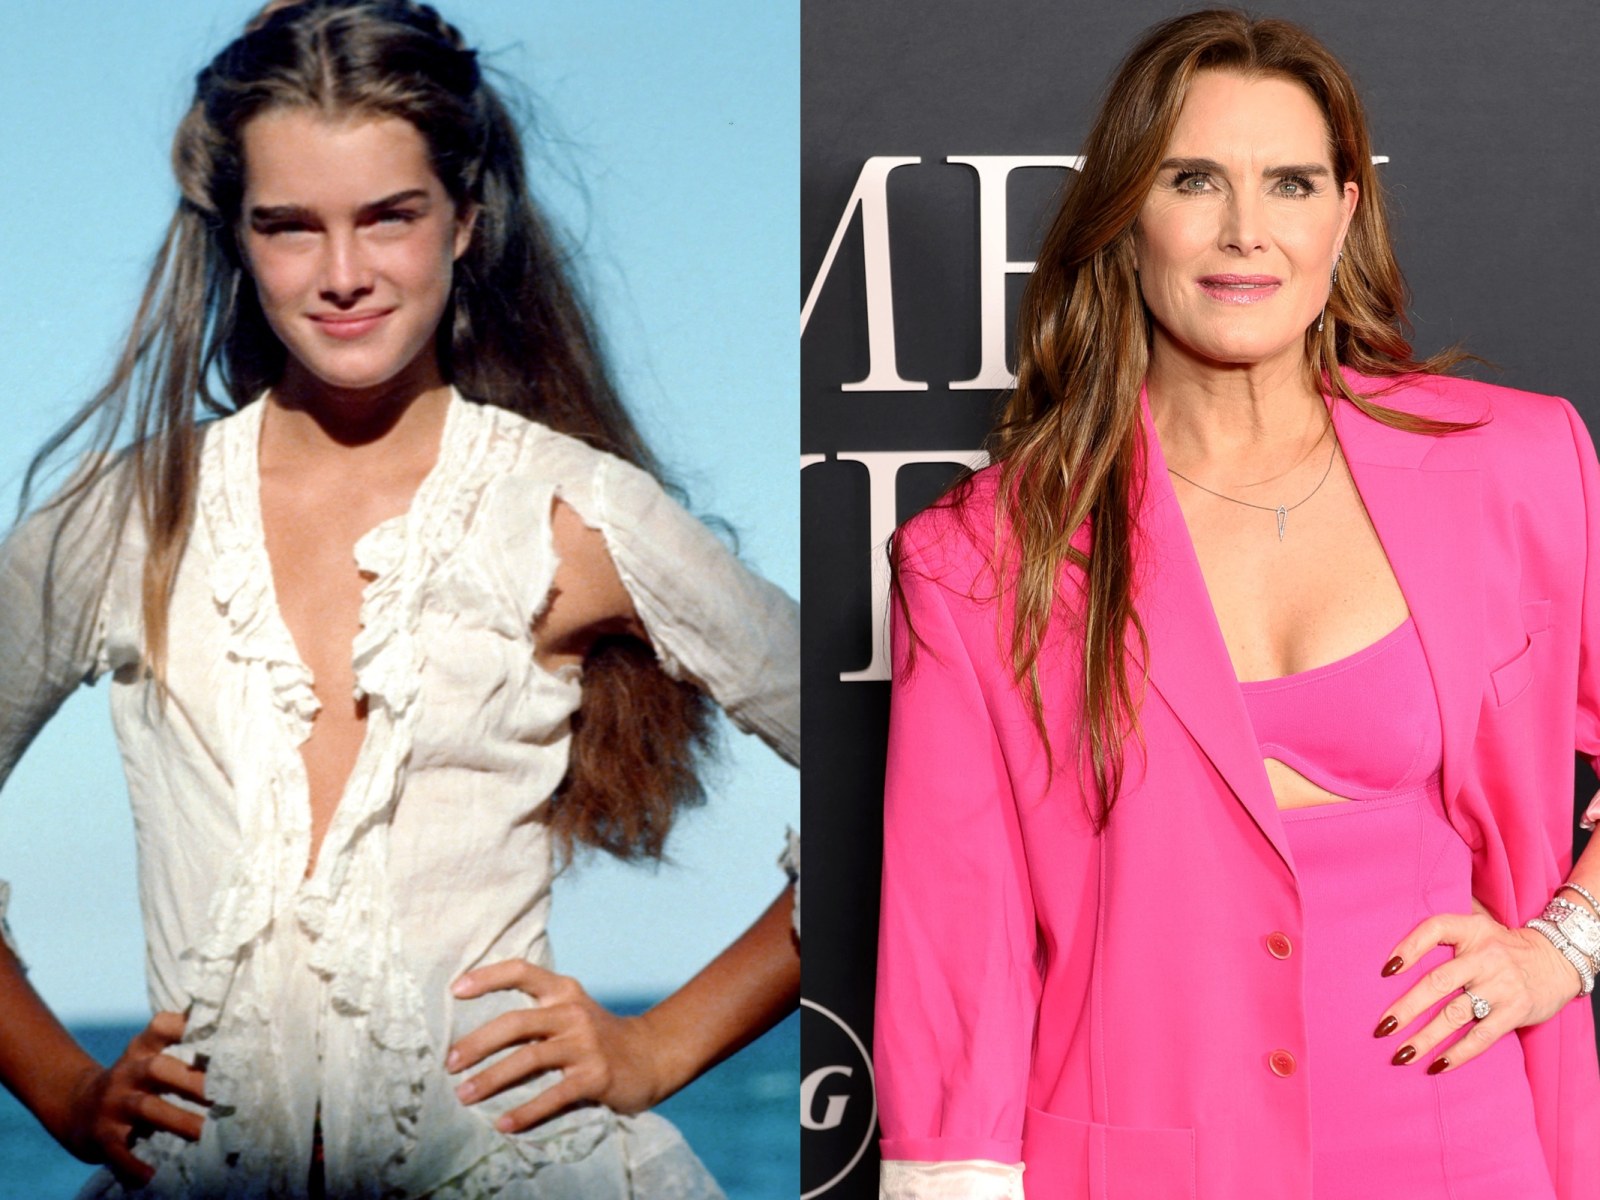 1600px x 1200px - Brooke Shields' Sexualization as a Child Was Staggering